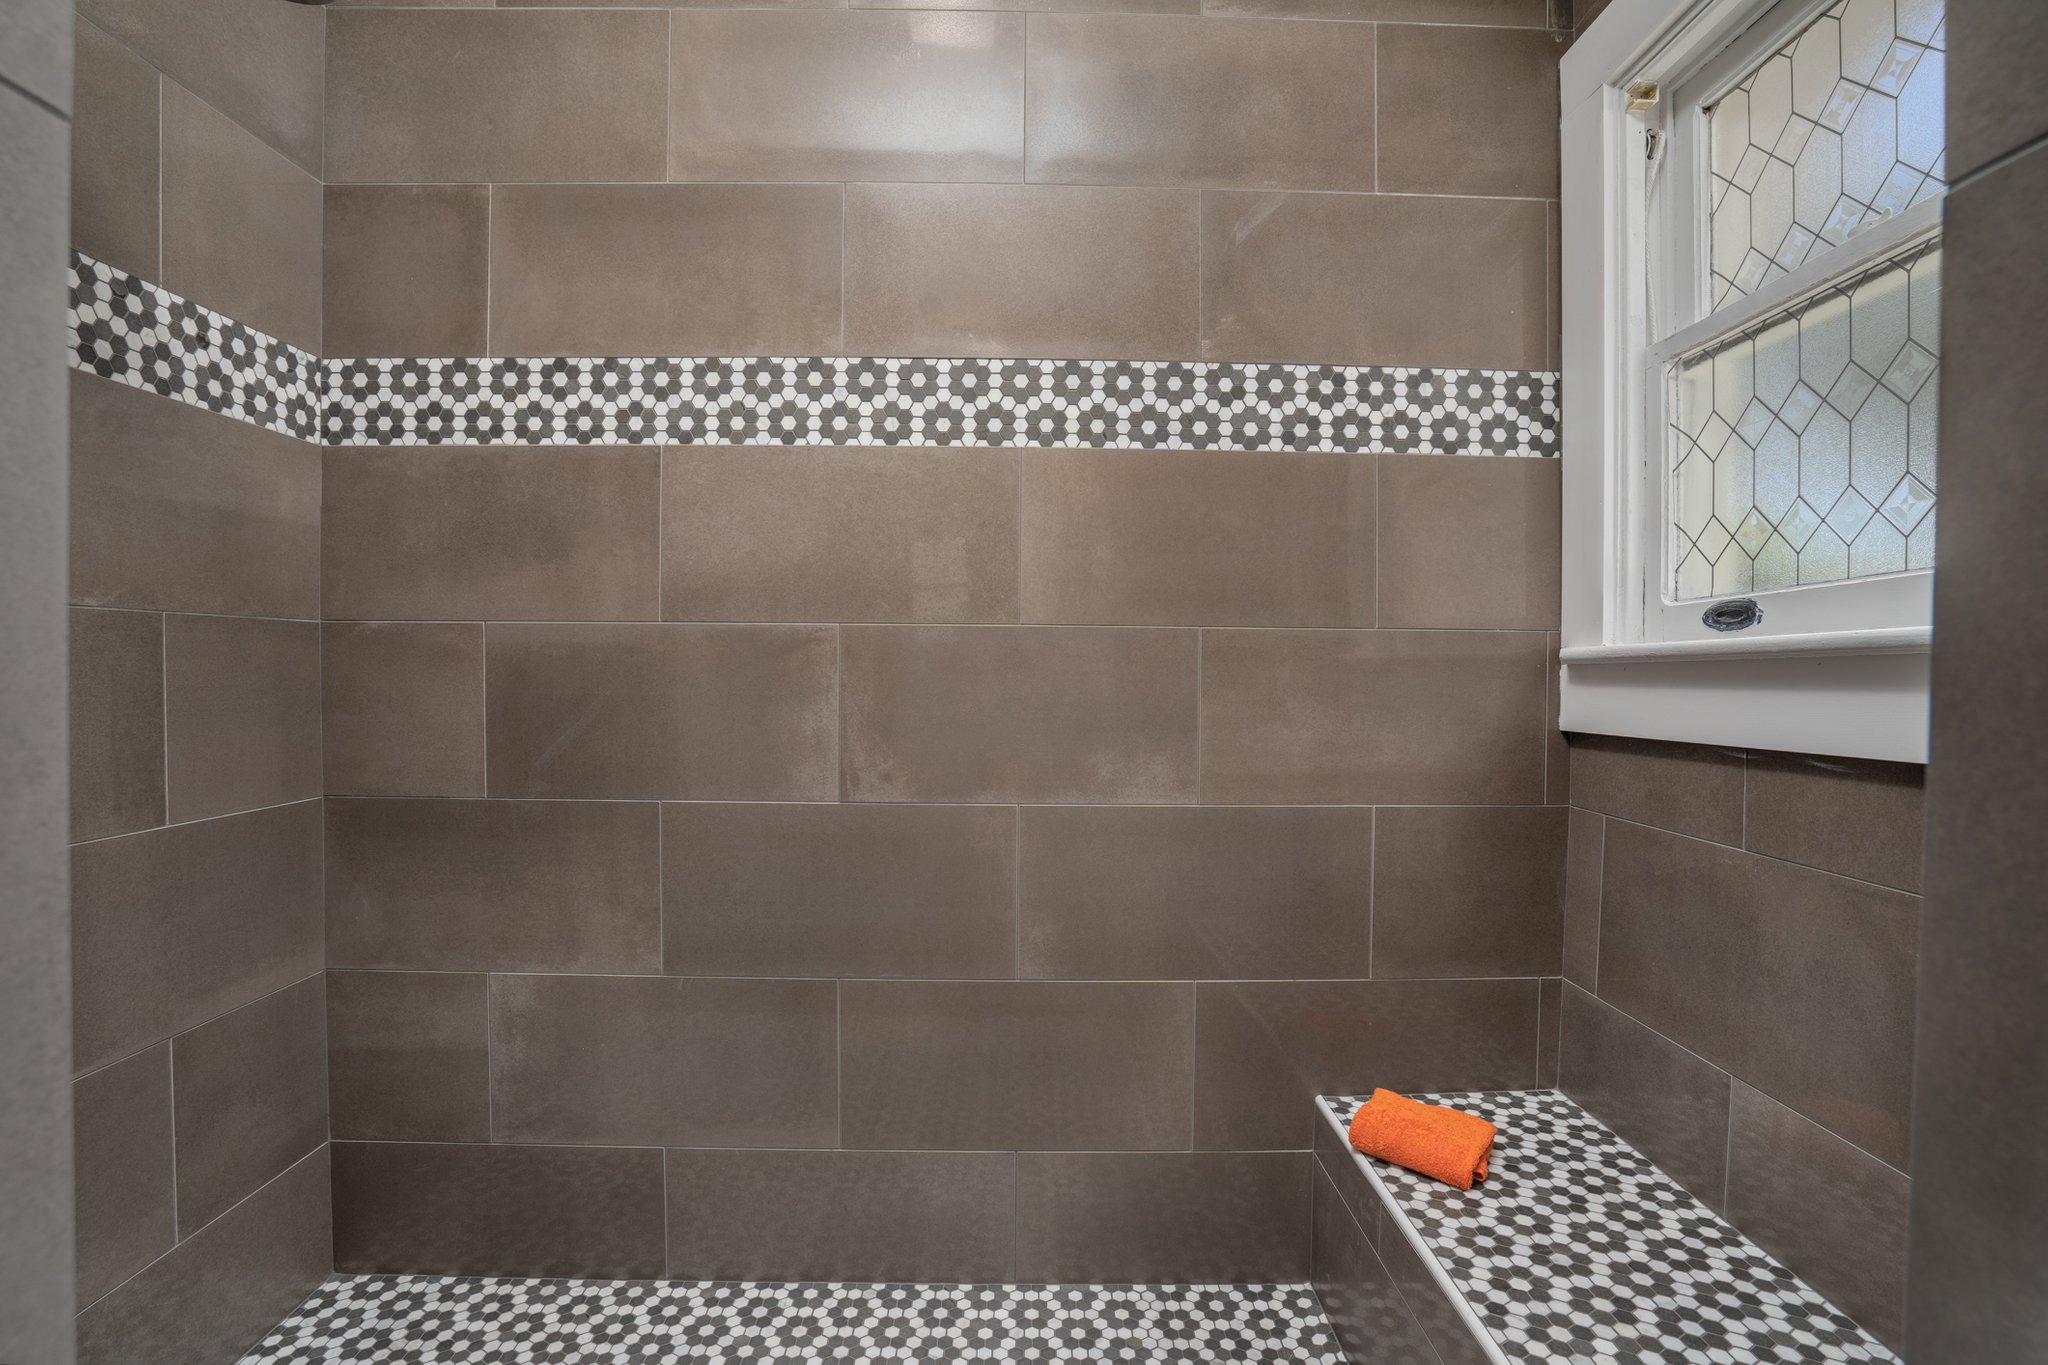 5 Tile Trends You’re Going to See Everywhere